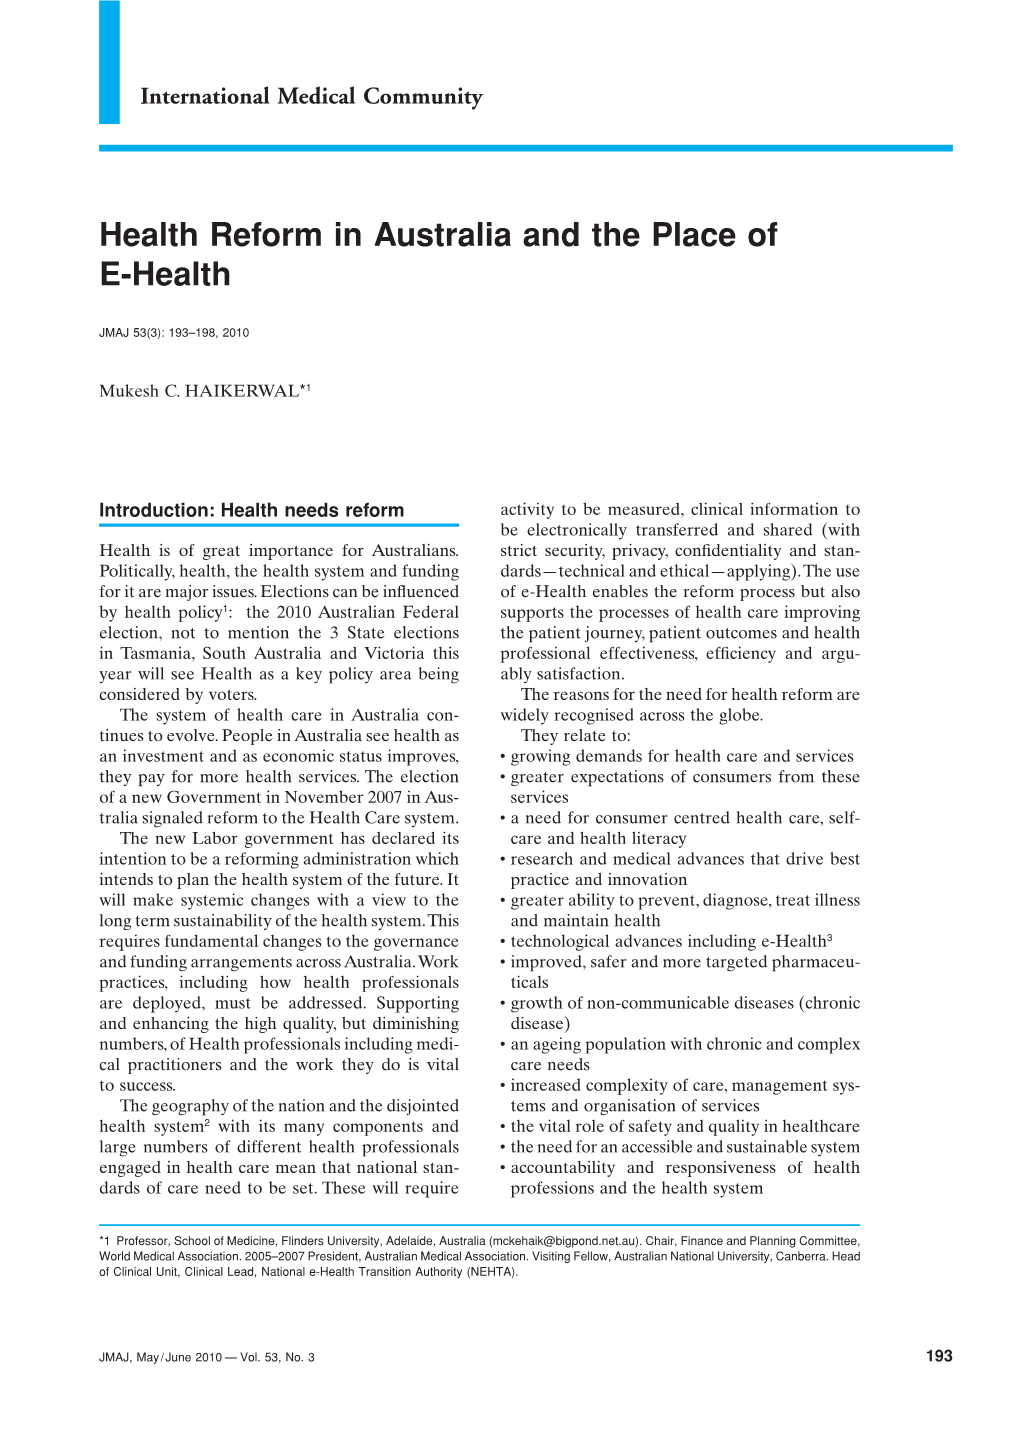 Health Reform in Australia and the Place of E-Health